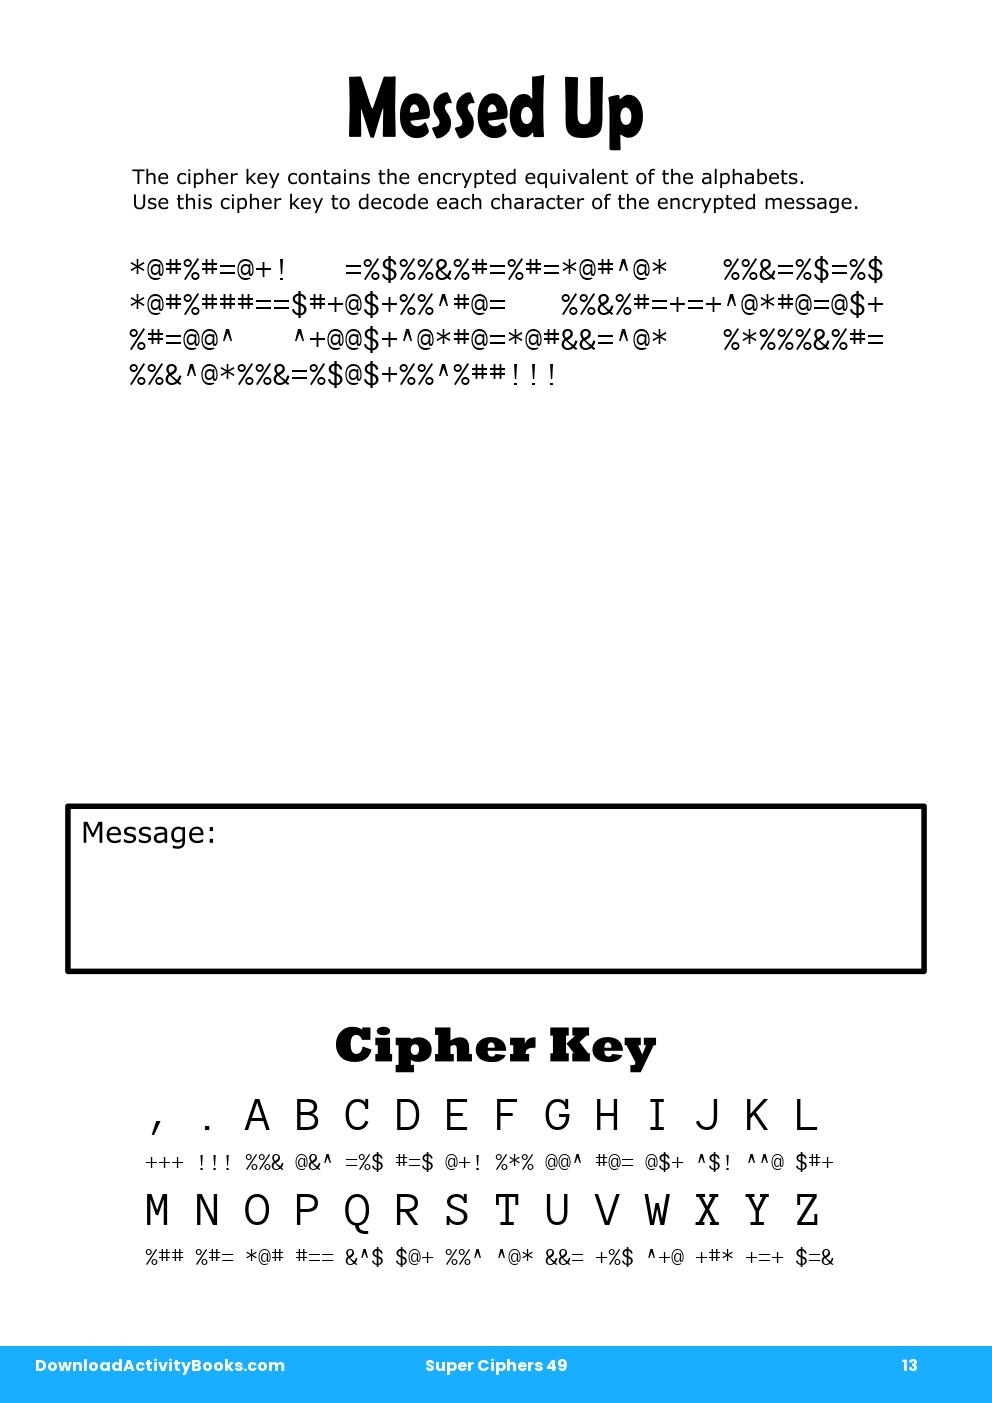 Messed Up in Super Ciphers 49